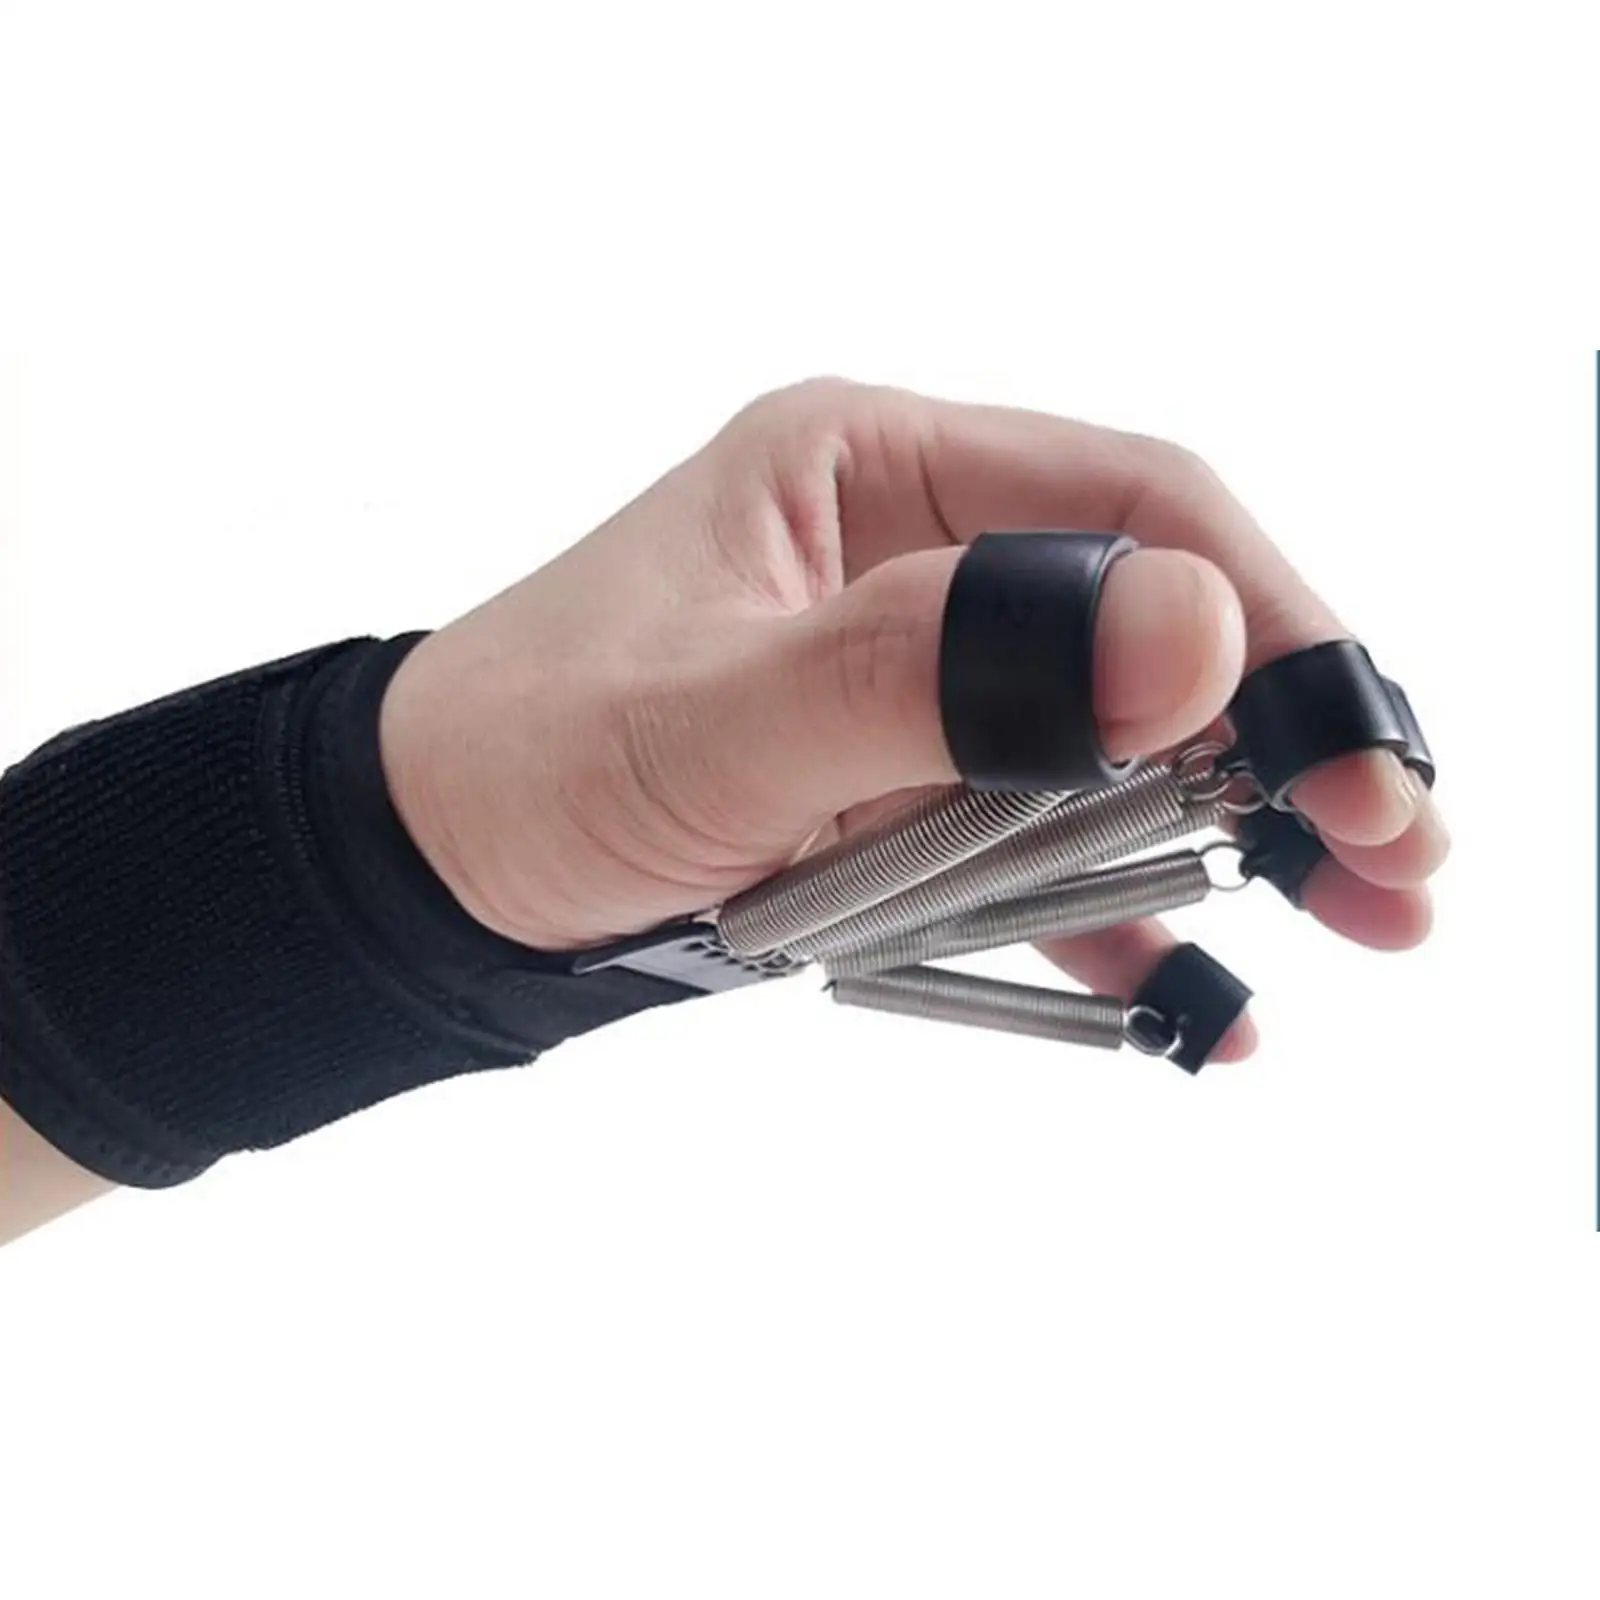 Finger trainer, adjustable finger grip device for tennis players, pianists